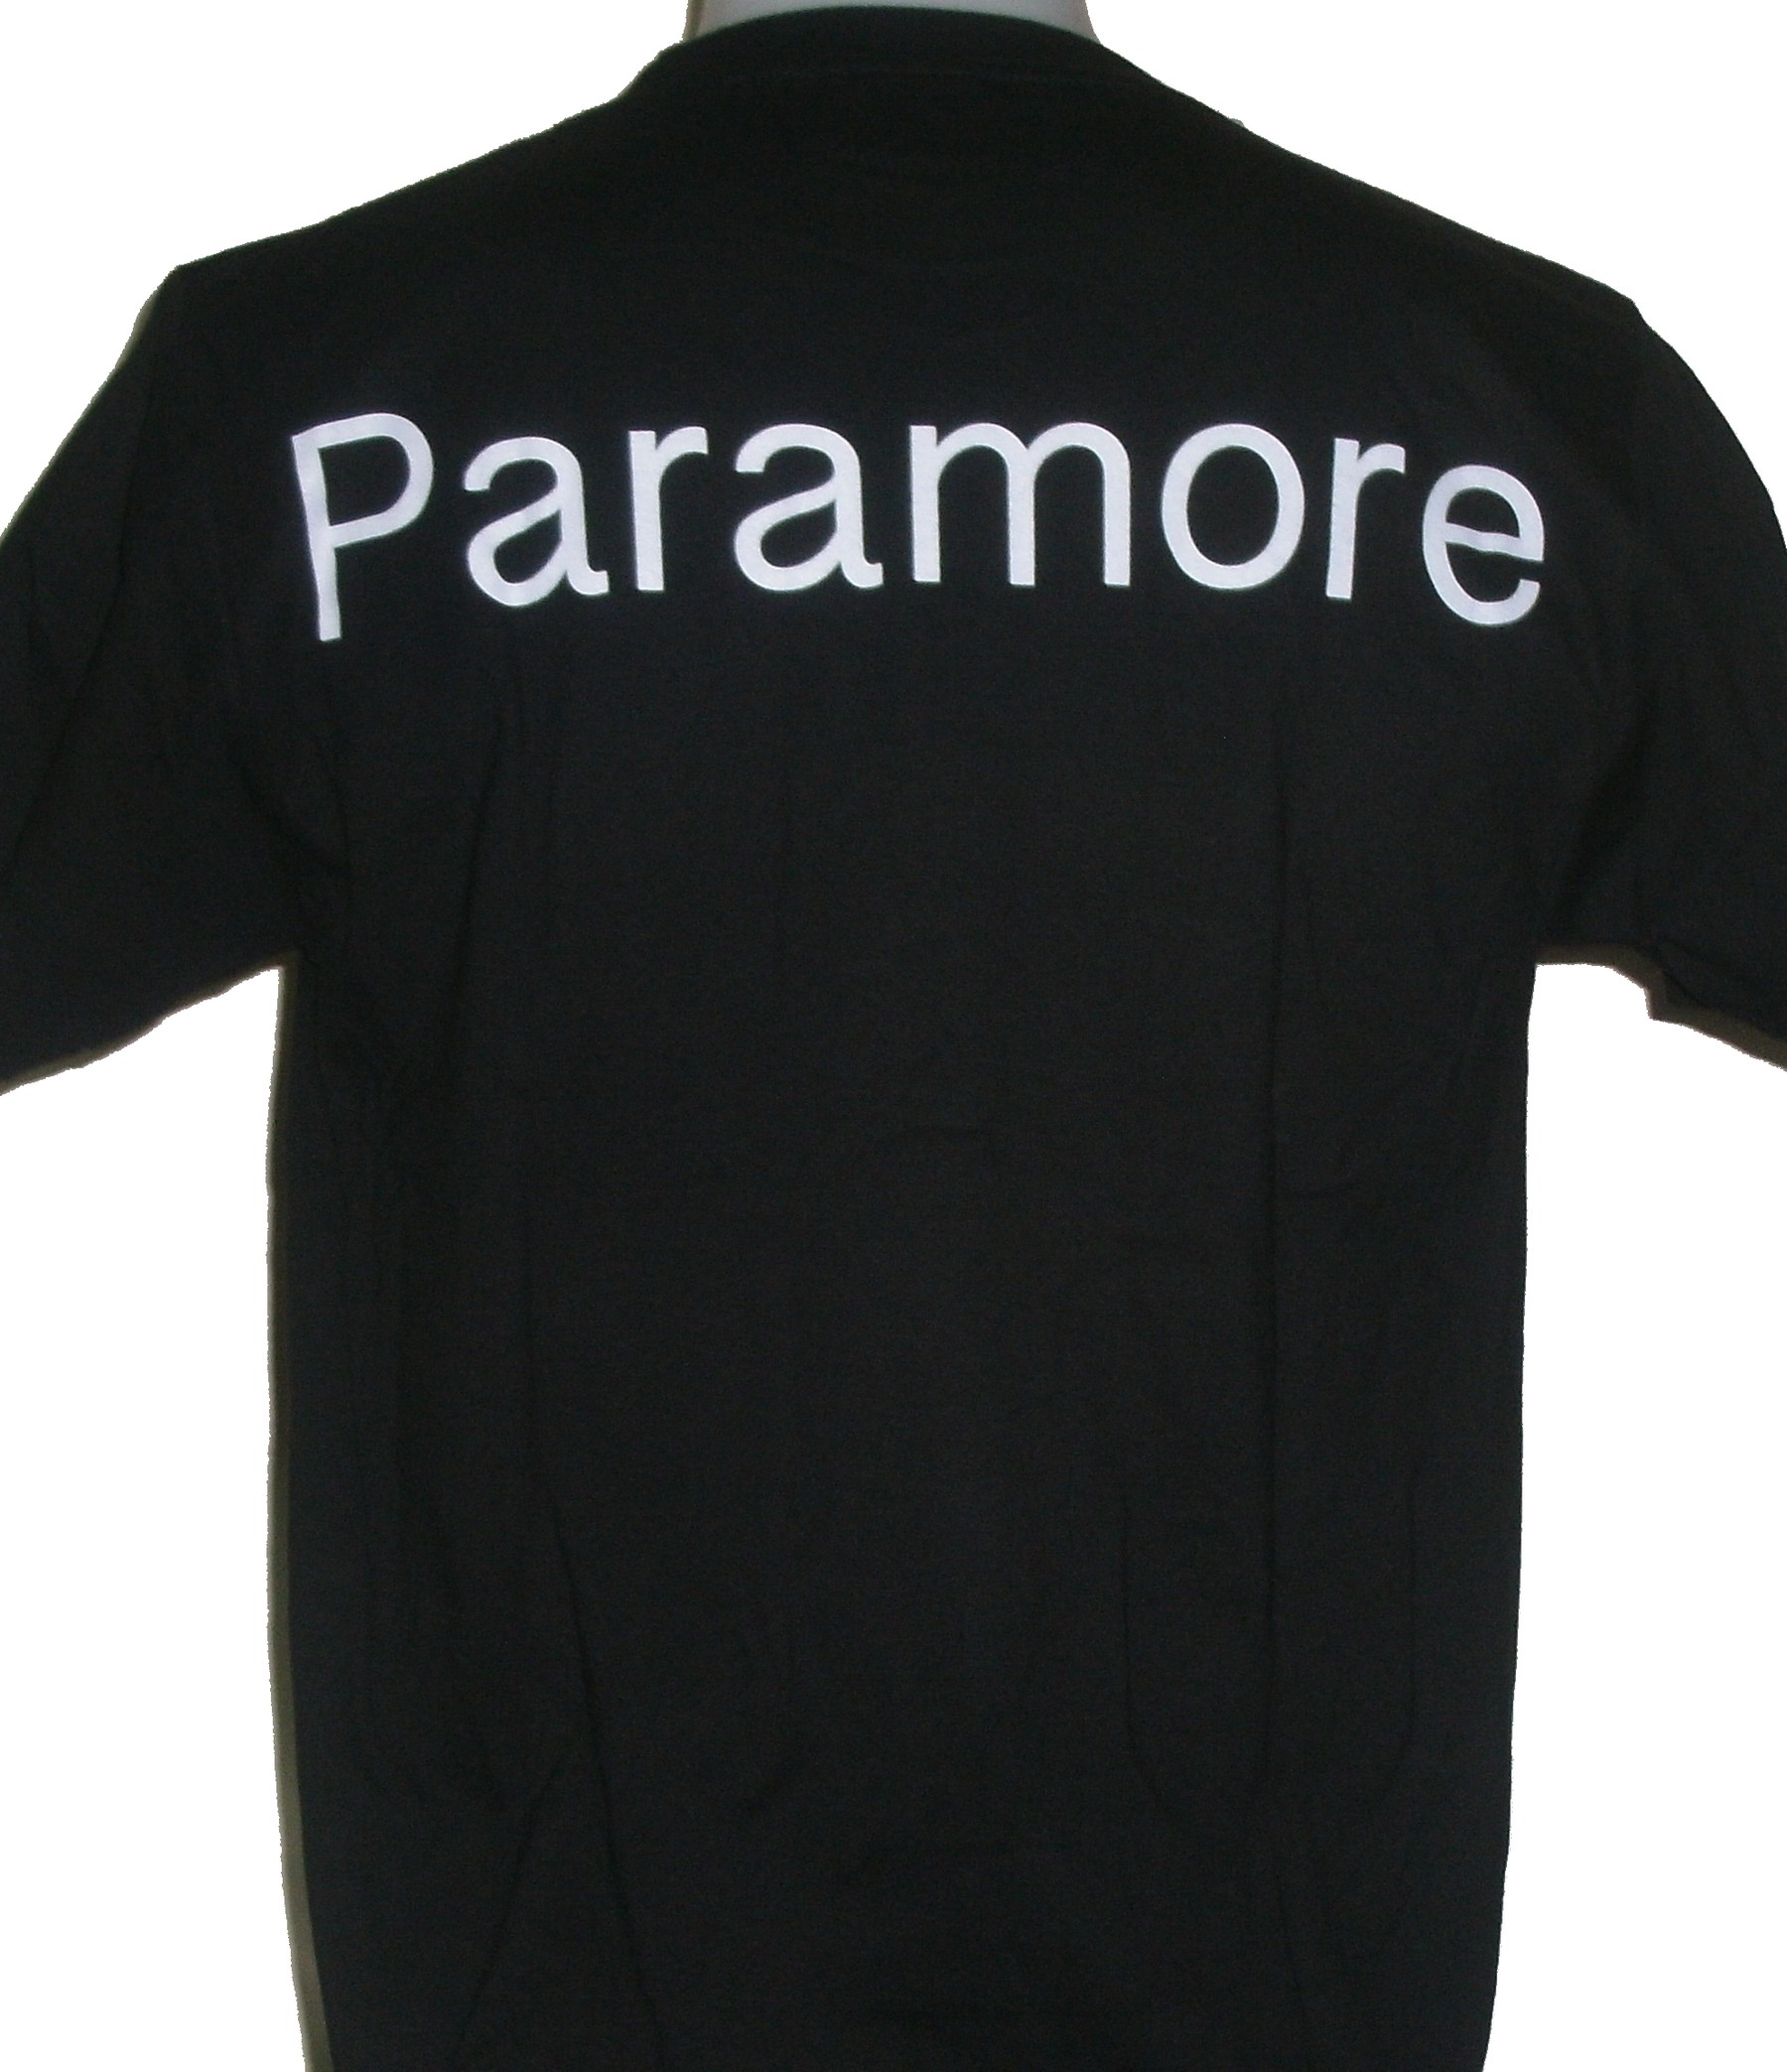 Paramore Brand New Eyes, Rock Band T-shirts - Print your thoughts. Tell  your stories.